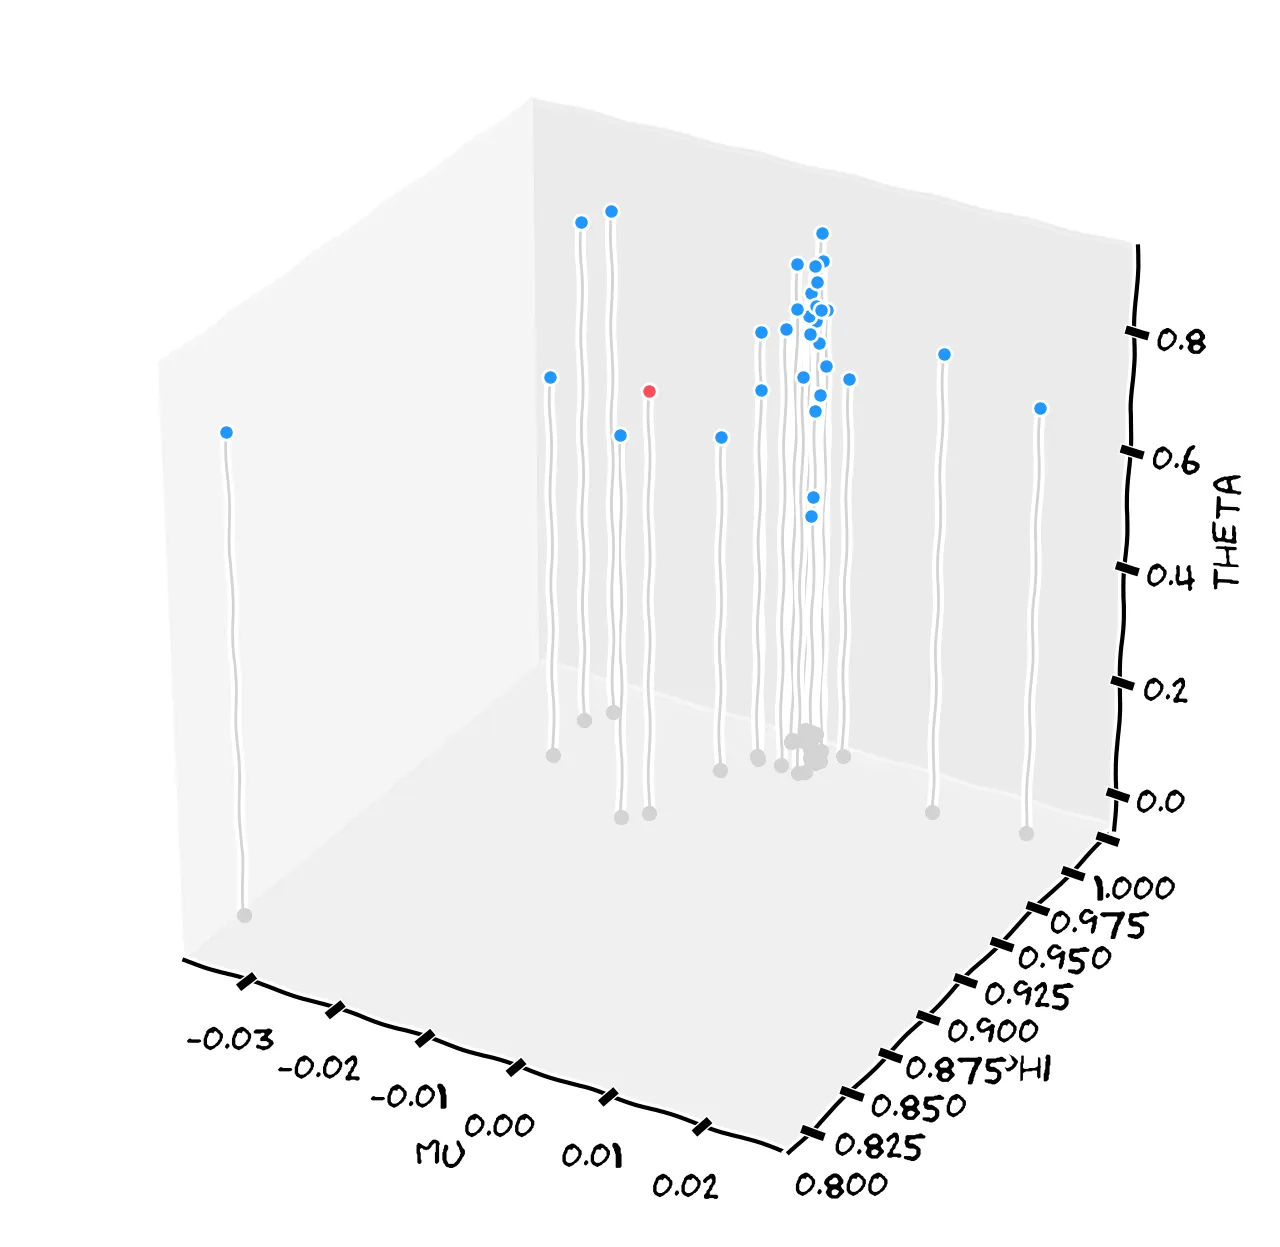 A 3D scatter plot. The three axes are \mu, \phi and \theta. There are 32 blue points. They cluster around one area, but with a lot of variation. One red point is plotted, which sits a bit outside the center of the cluster.